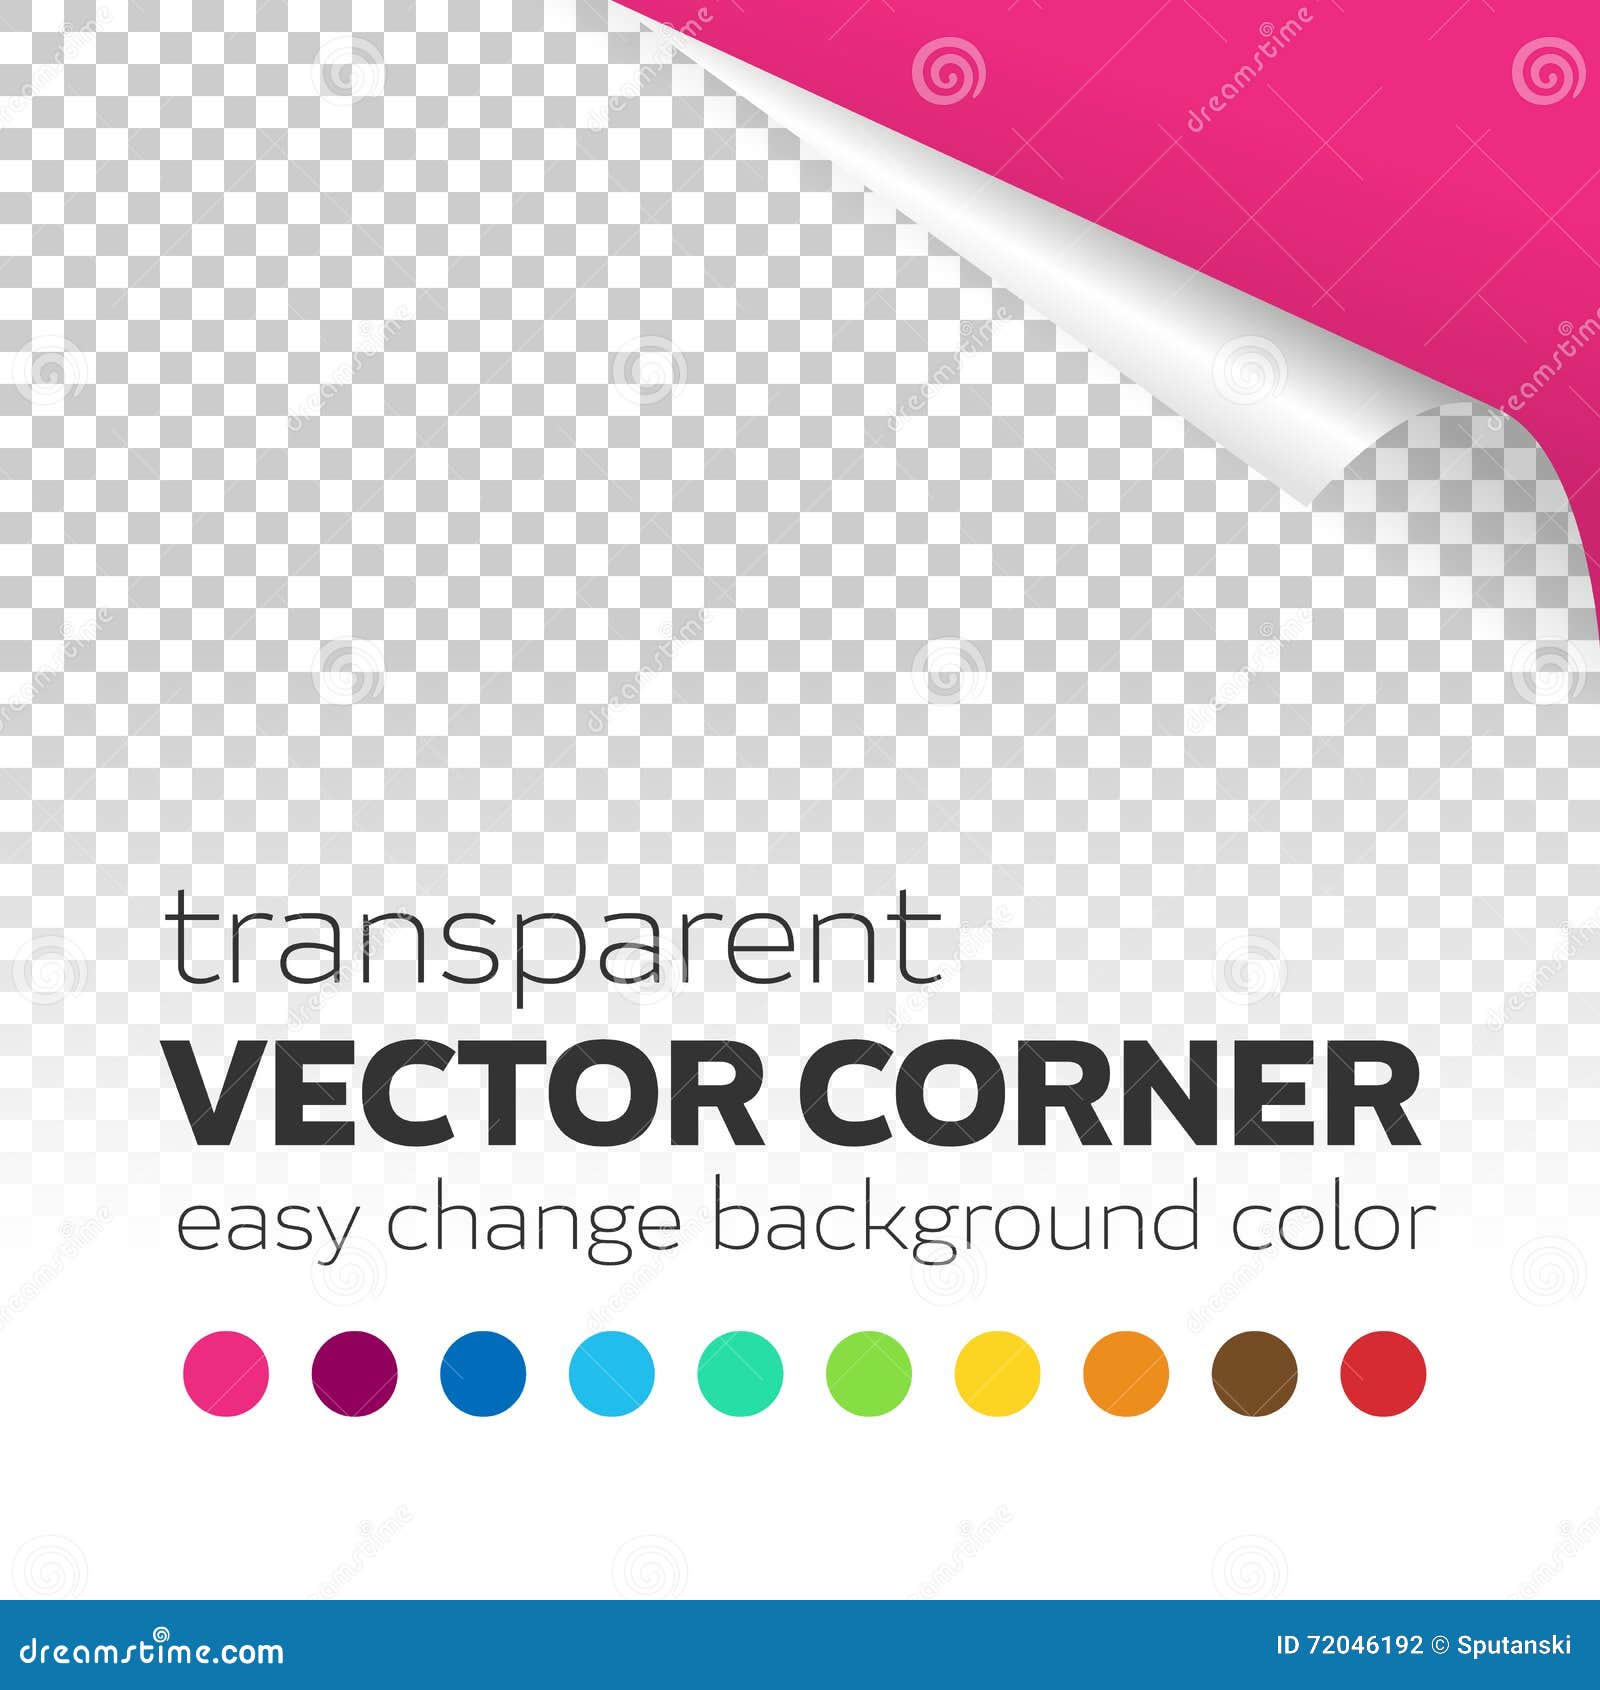 transparent paper page curl corner with colored background